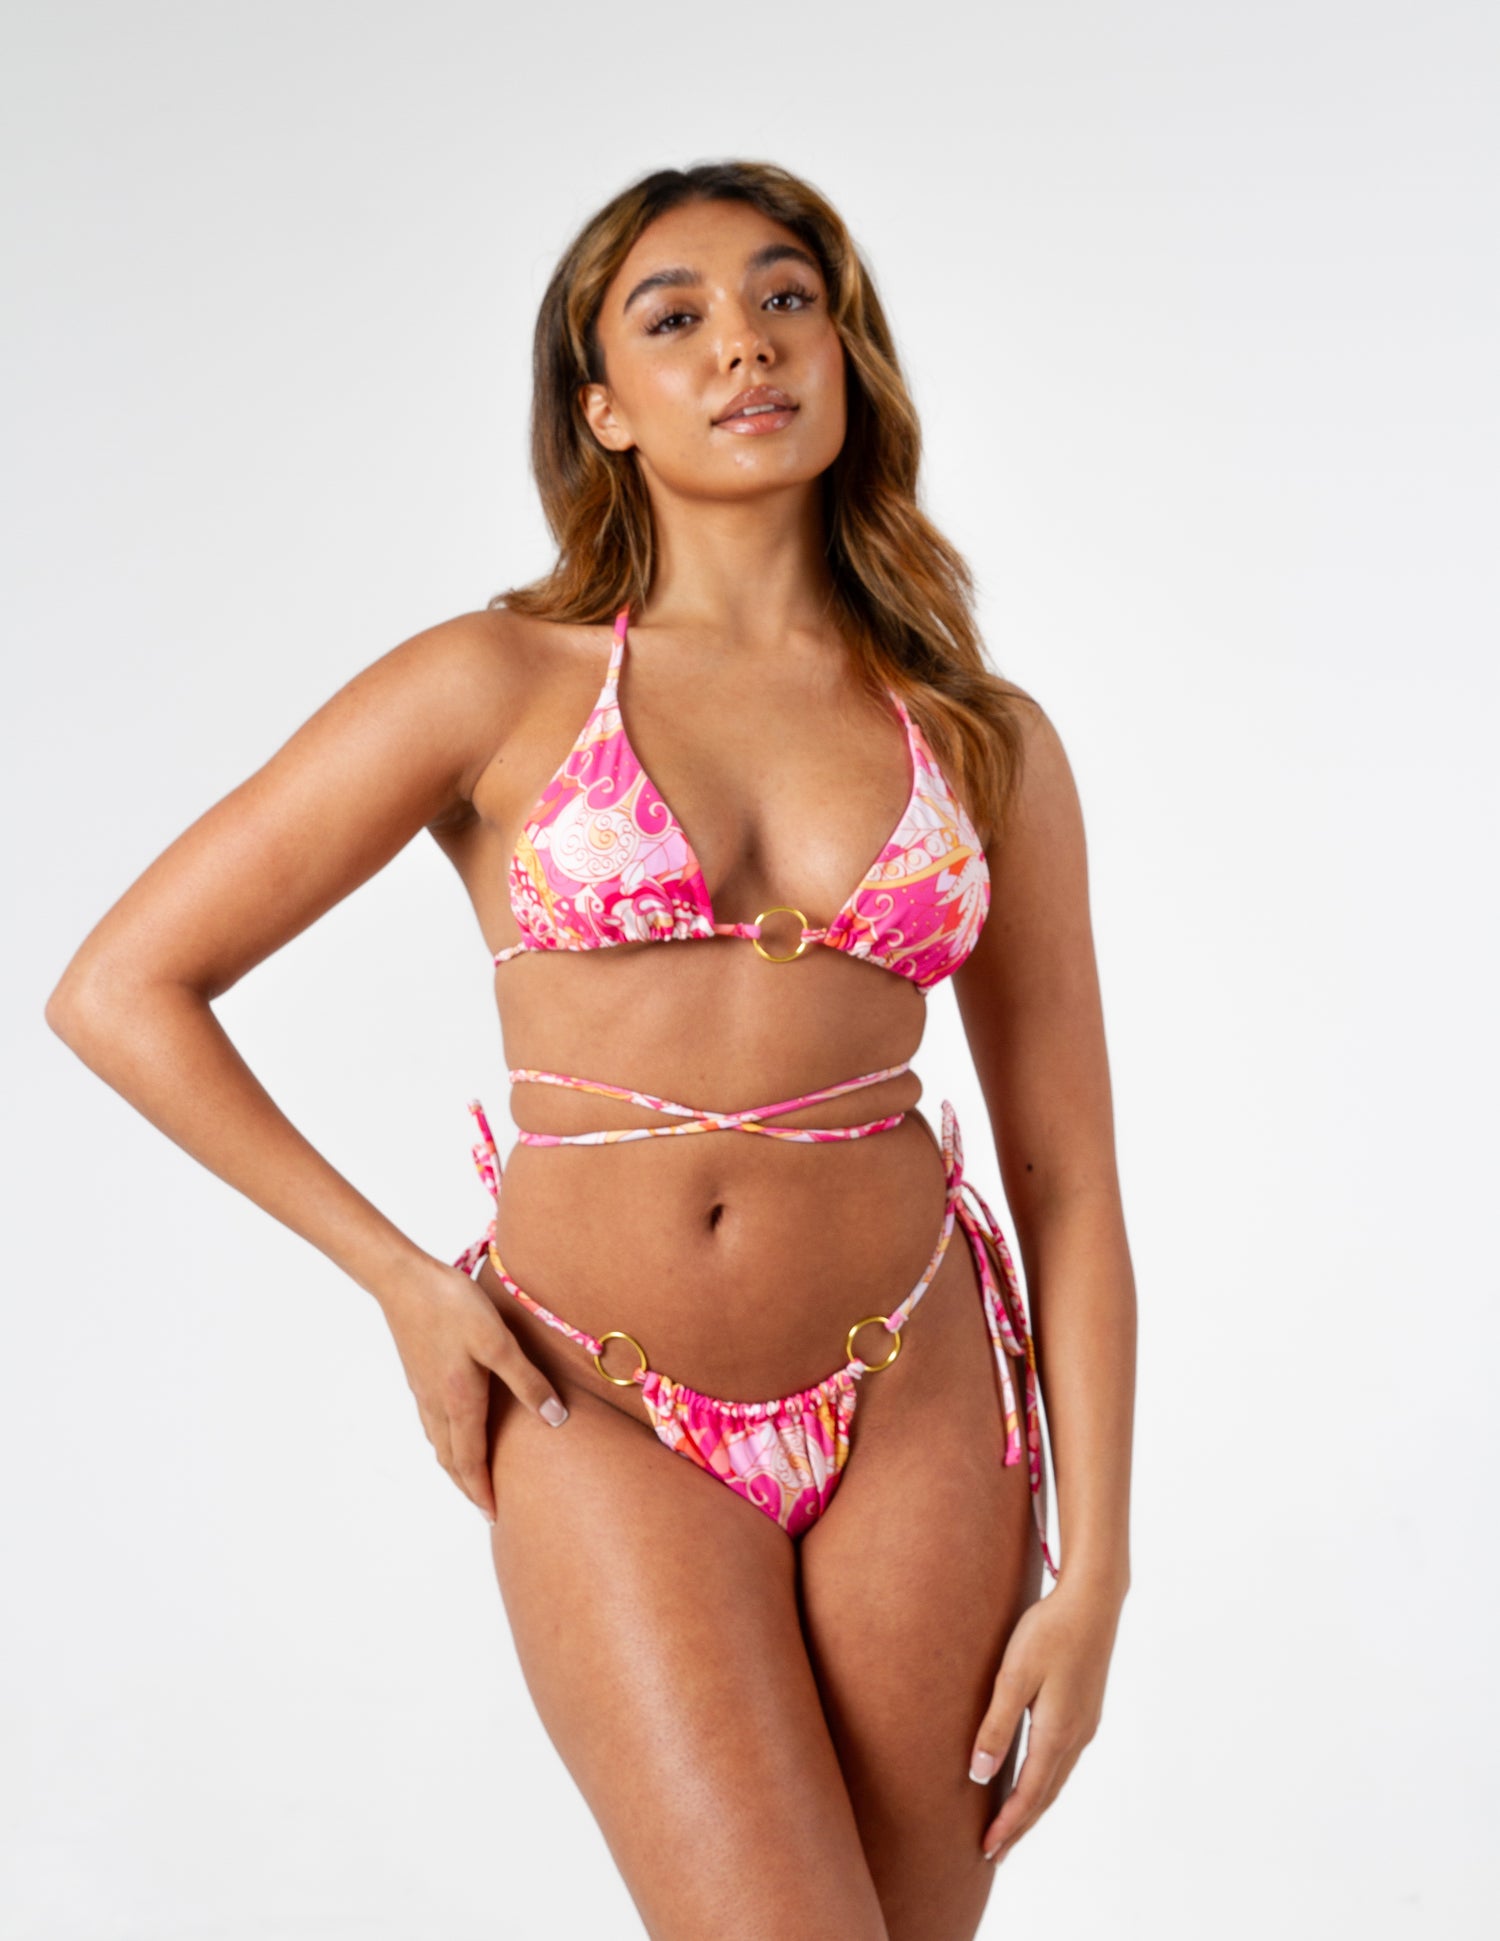 Beautiful vibrant pink printed bikini bottoms with tie side on our model. Front